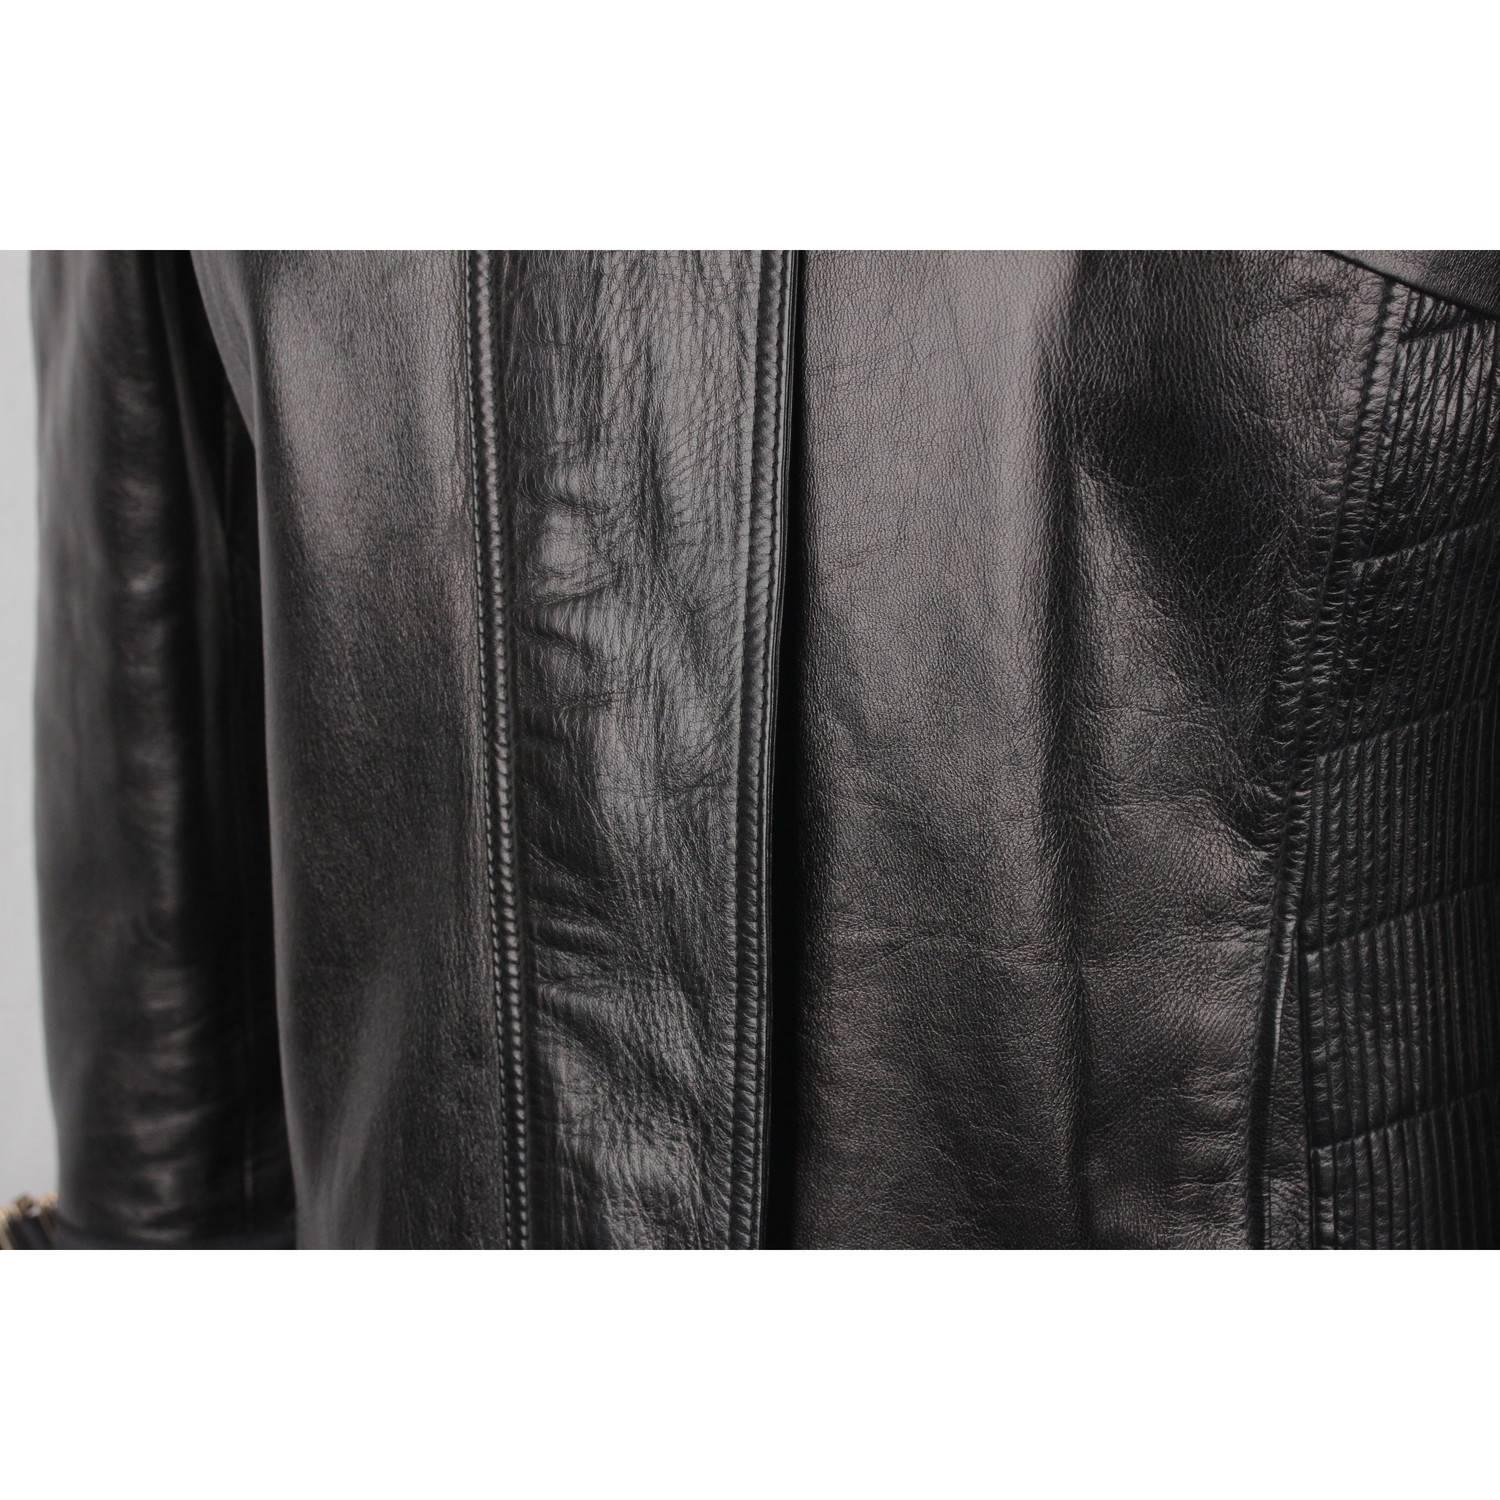 GUCCI Black Leather BIKER JACKET with Pintucked Panels 4